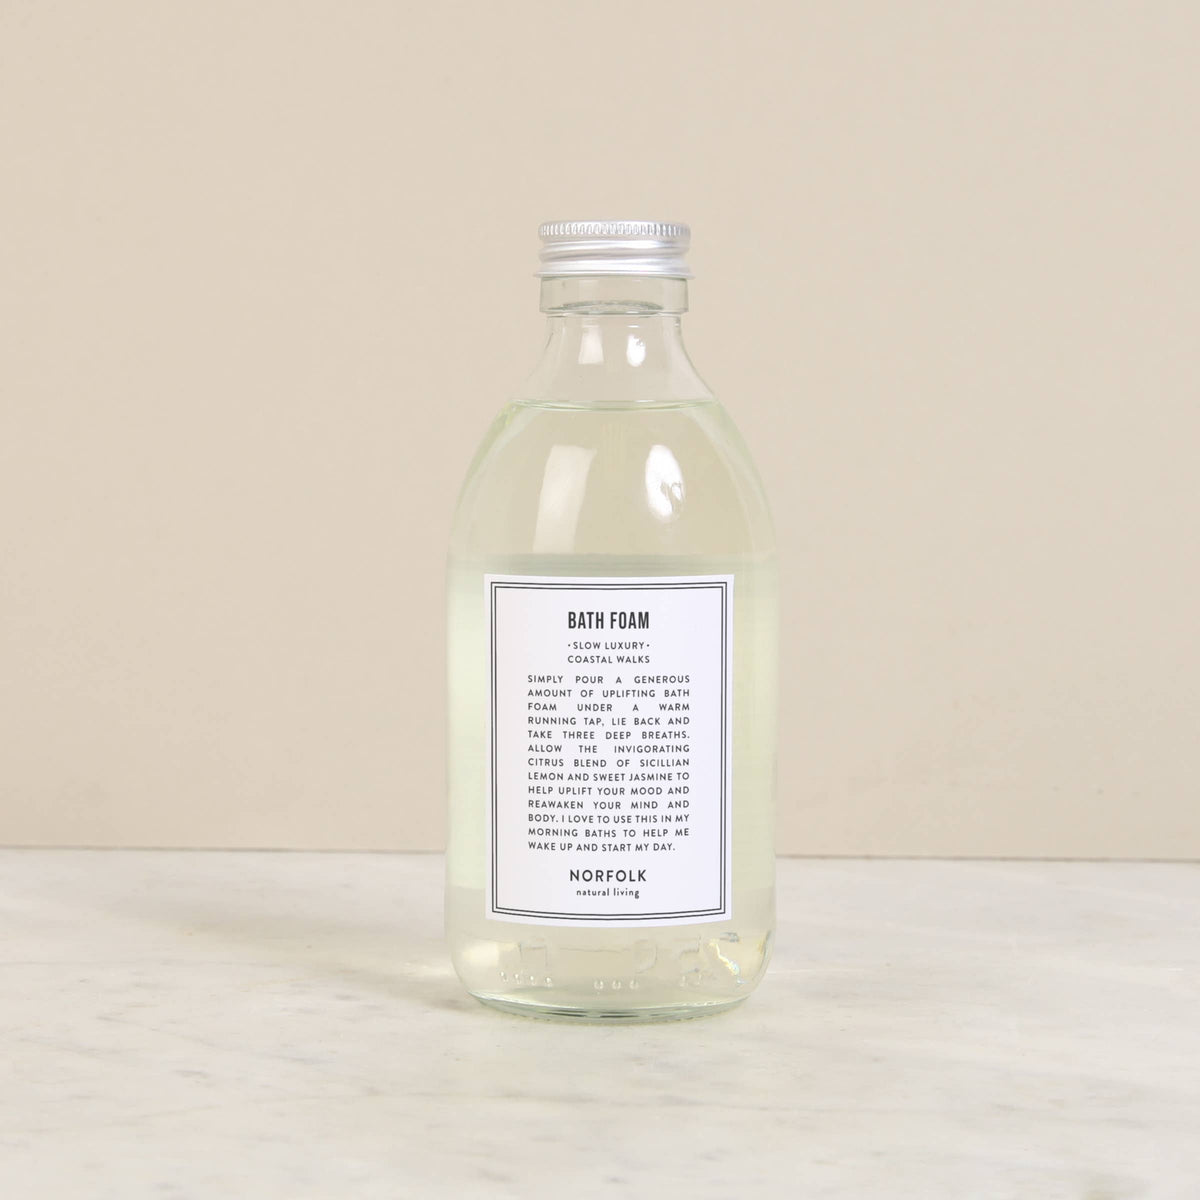 A clear glass bottle containing Norfolk Natural Living Coastal Bath Foam, 250ml infused with essential oils sits on a beige surface. It features a white label with black text that includes product details. The bottle has a silver screw cap.